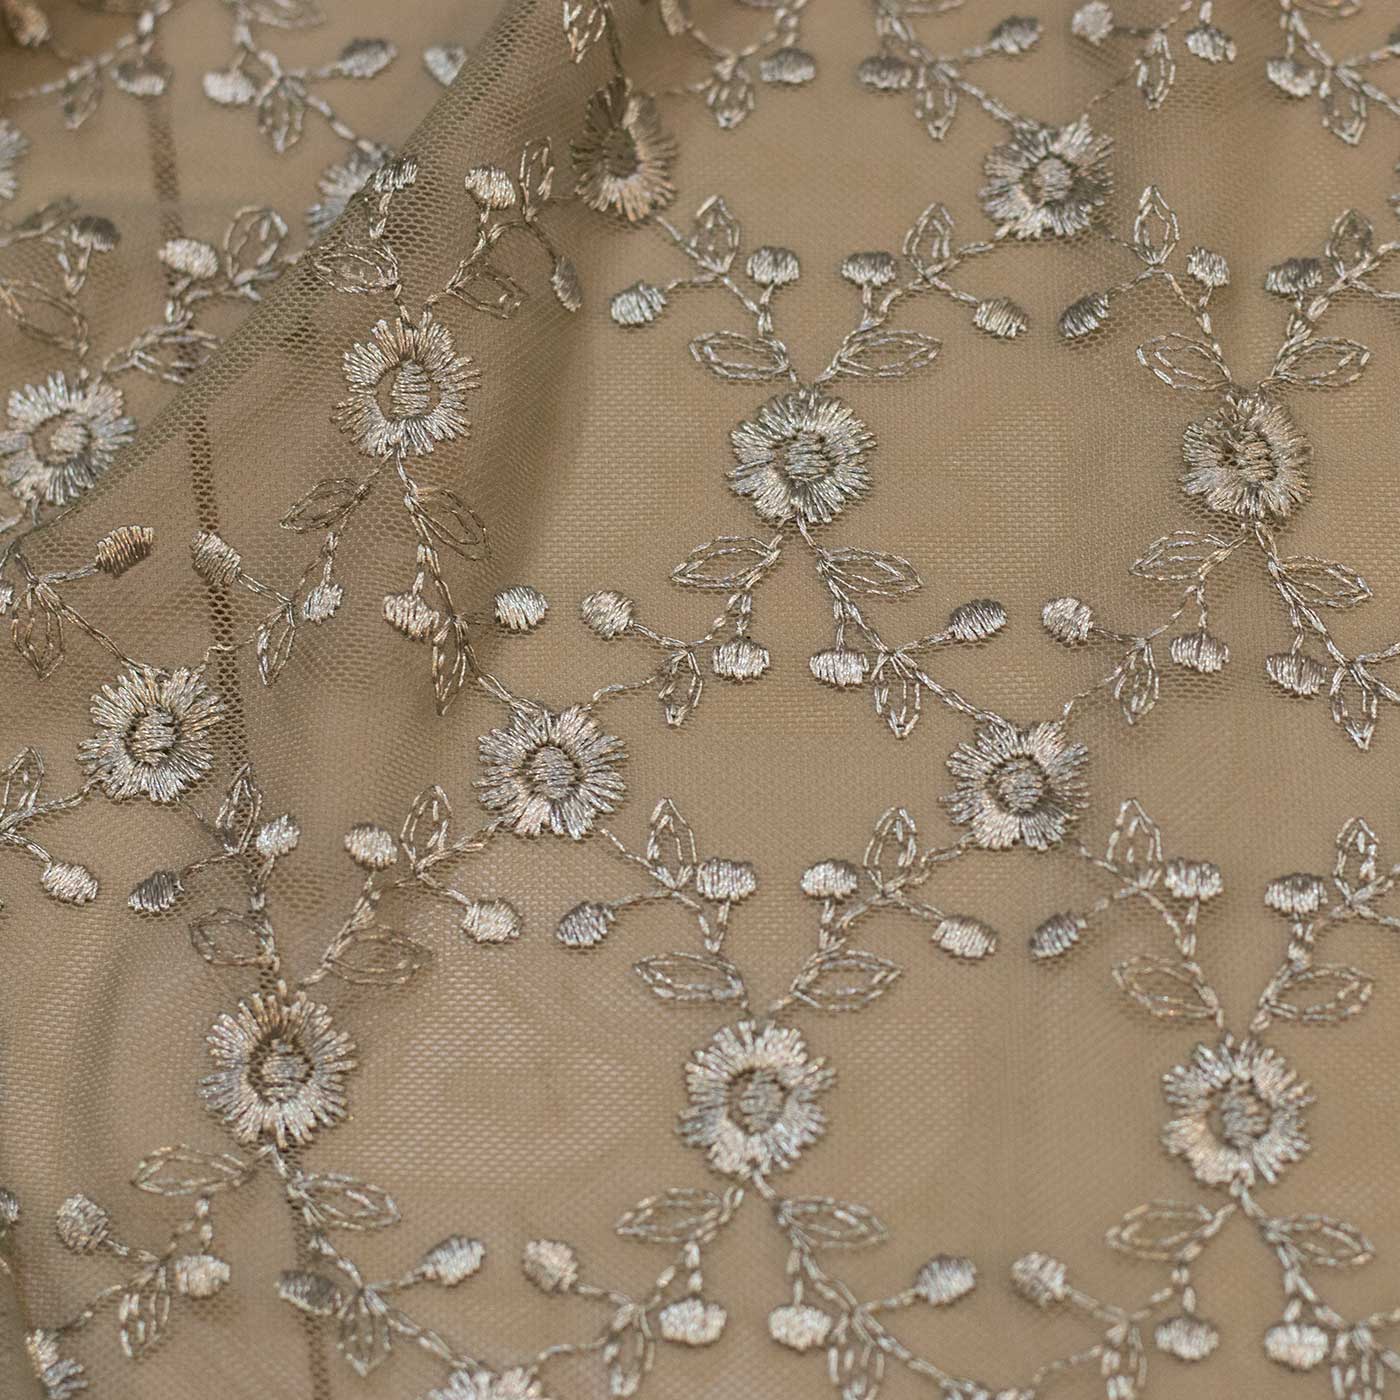 Embroidered Olive Mesh Fabric